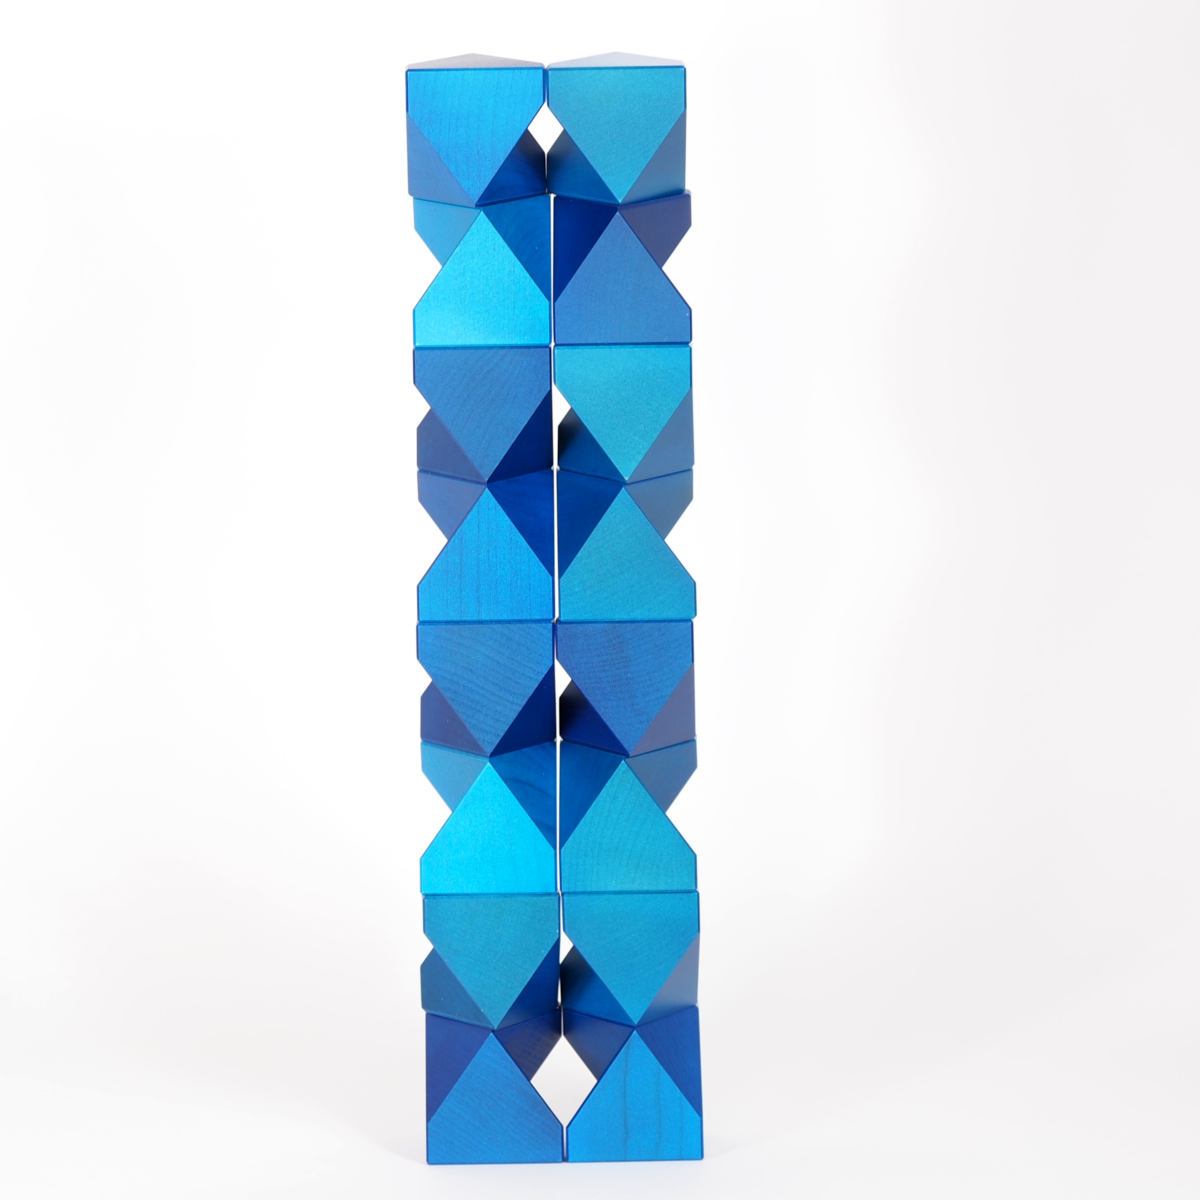 Tawa (Blue) – Original Construction Game by Naef, made of Wood